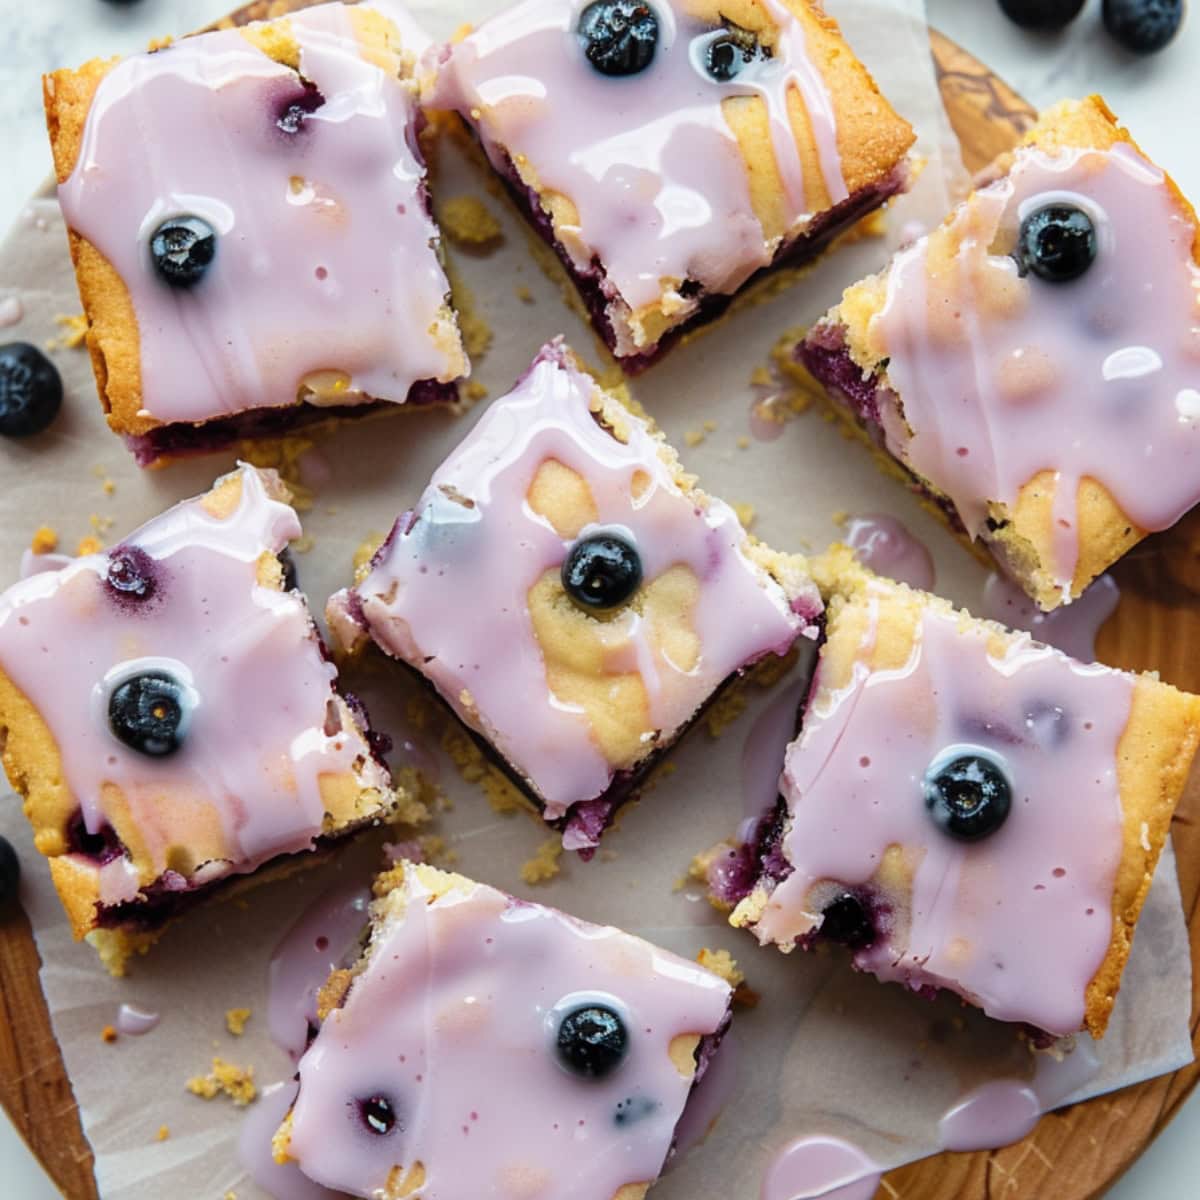 Top view of square slices of lemon blueberry blondies in a wooden board drizzled with glaze.